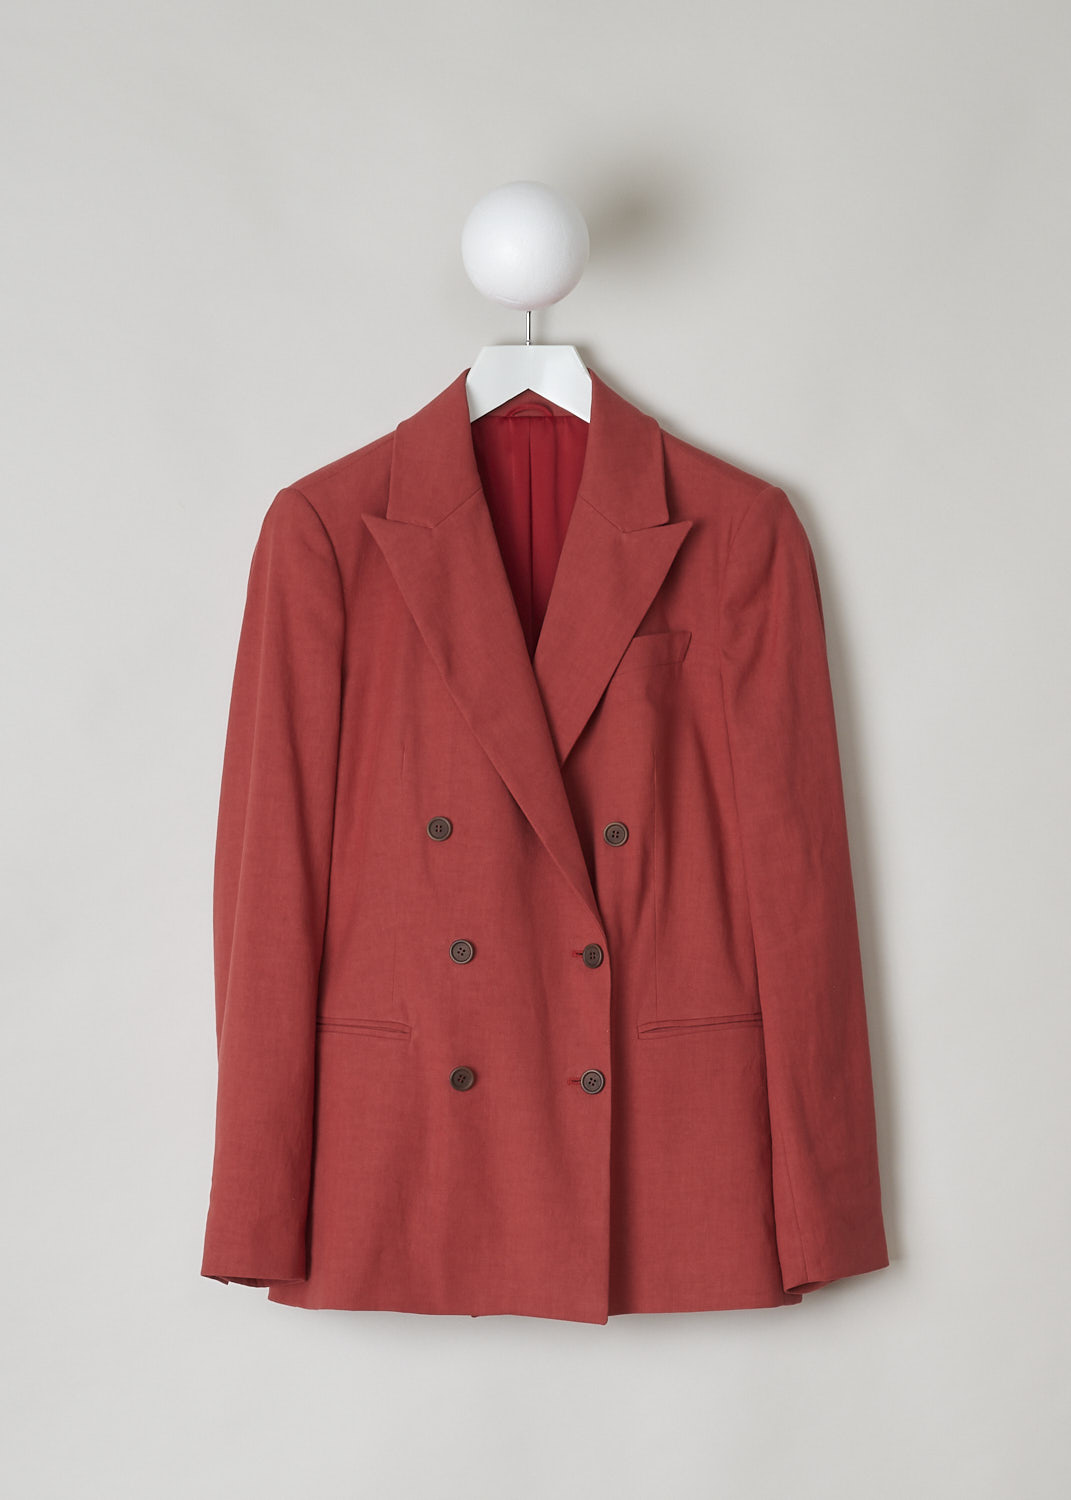 BRUNELLO CUCINELLI, DOUBLE BREASTED BLAZER IN MUTED RED, MF5918924_C7901, Red, Front, This double breasted blazer in a muted red color has a notched lapel. The long sleeved have buttoned cuffs and the blazer has three pockets: two regular welt pockets and one welt breast pocket. 
